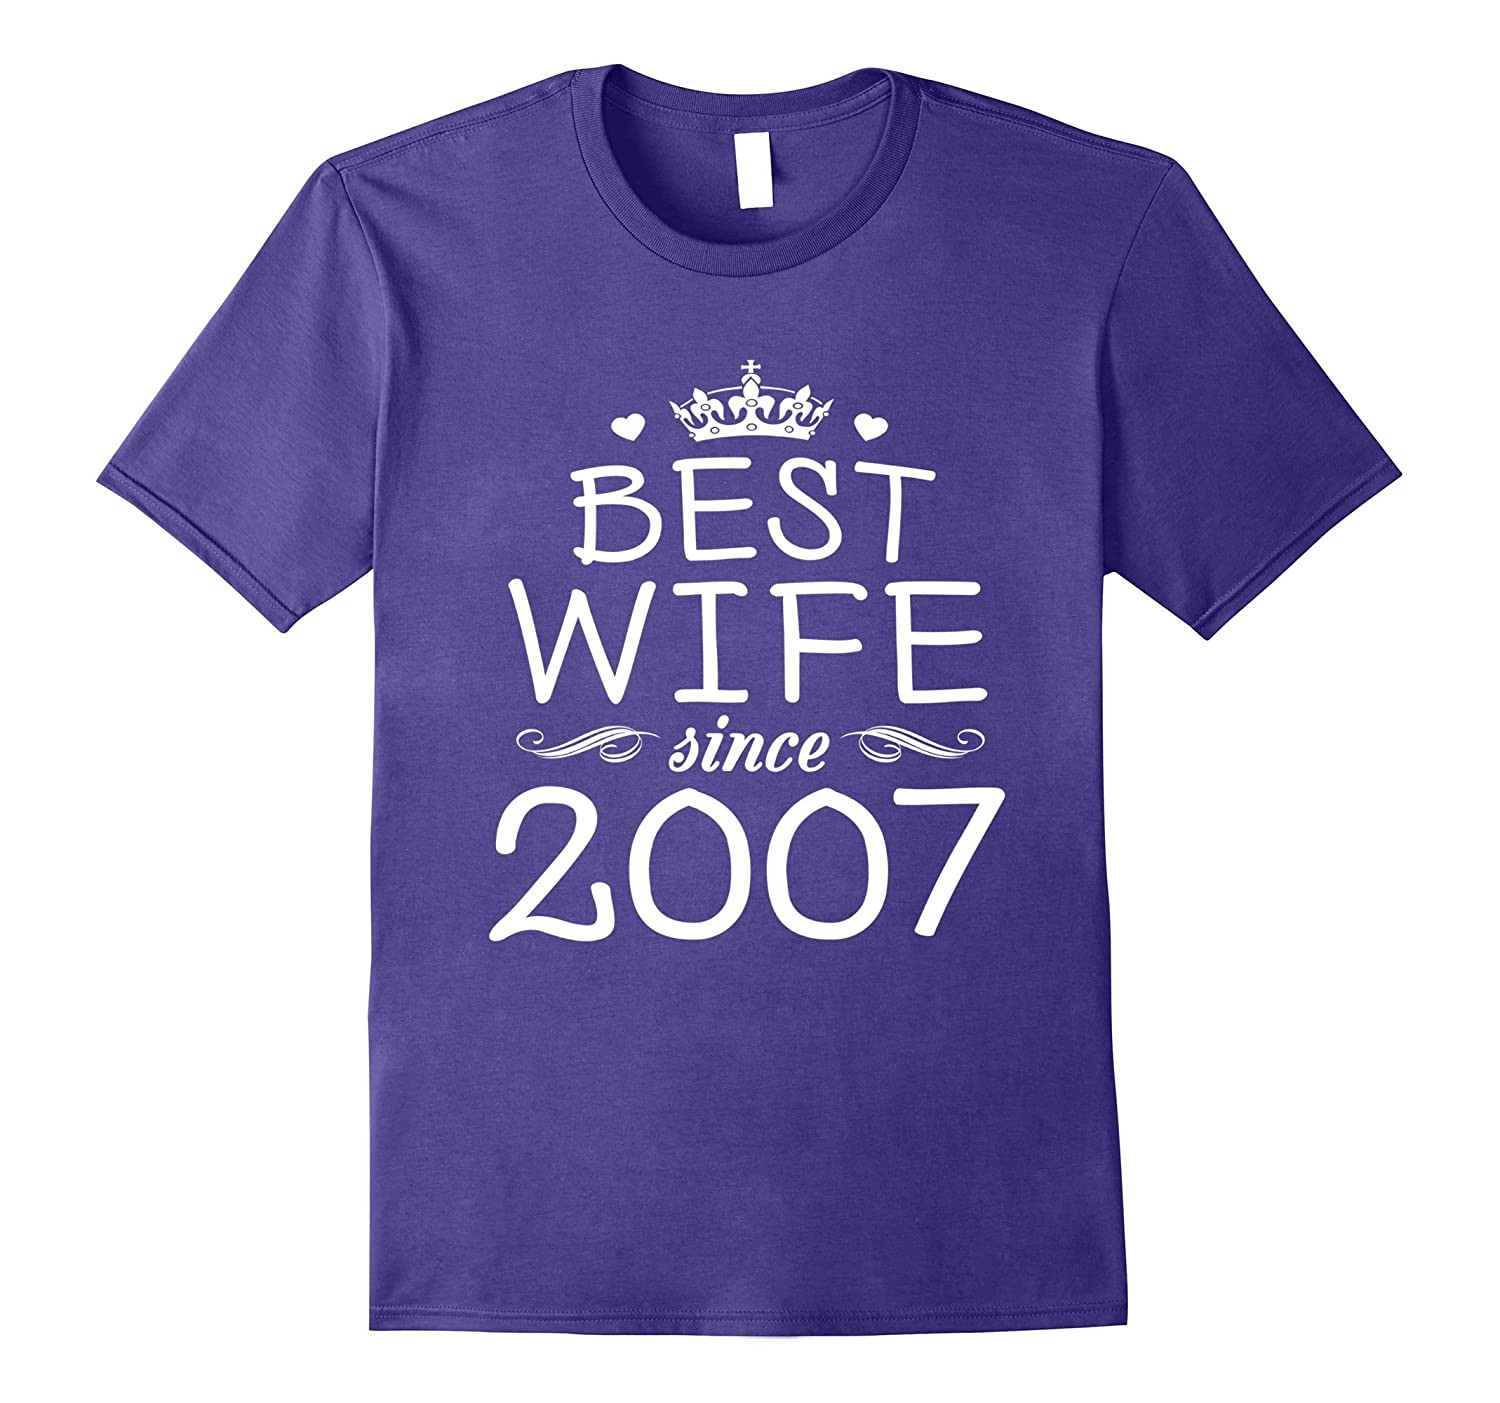 10Th Wedding Anniversary Gift Ideas For Her
 10th Wedding Anniversary Gift Ideas For Her Wife Since